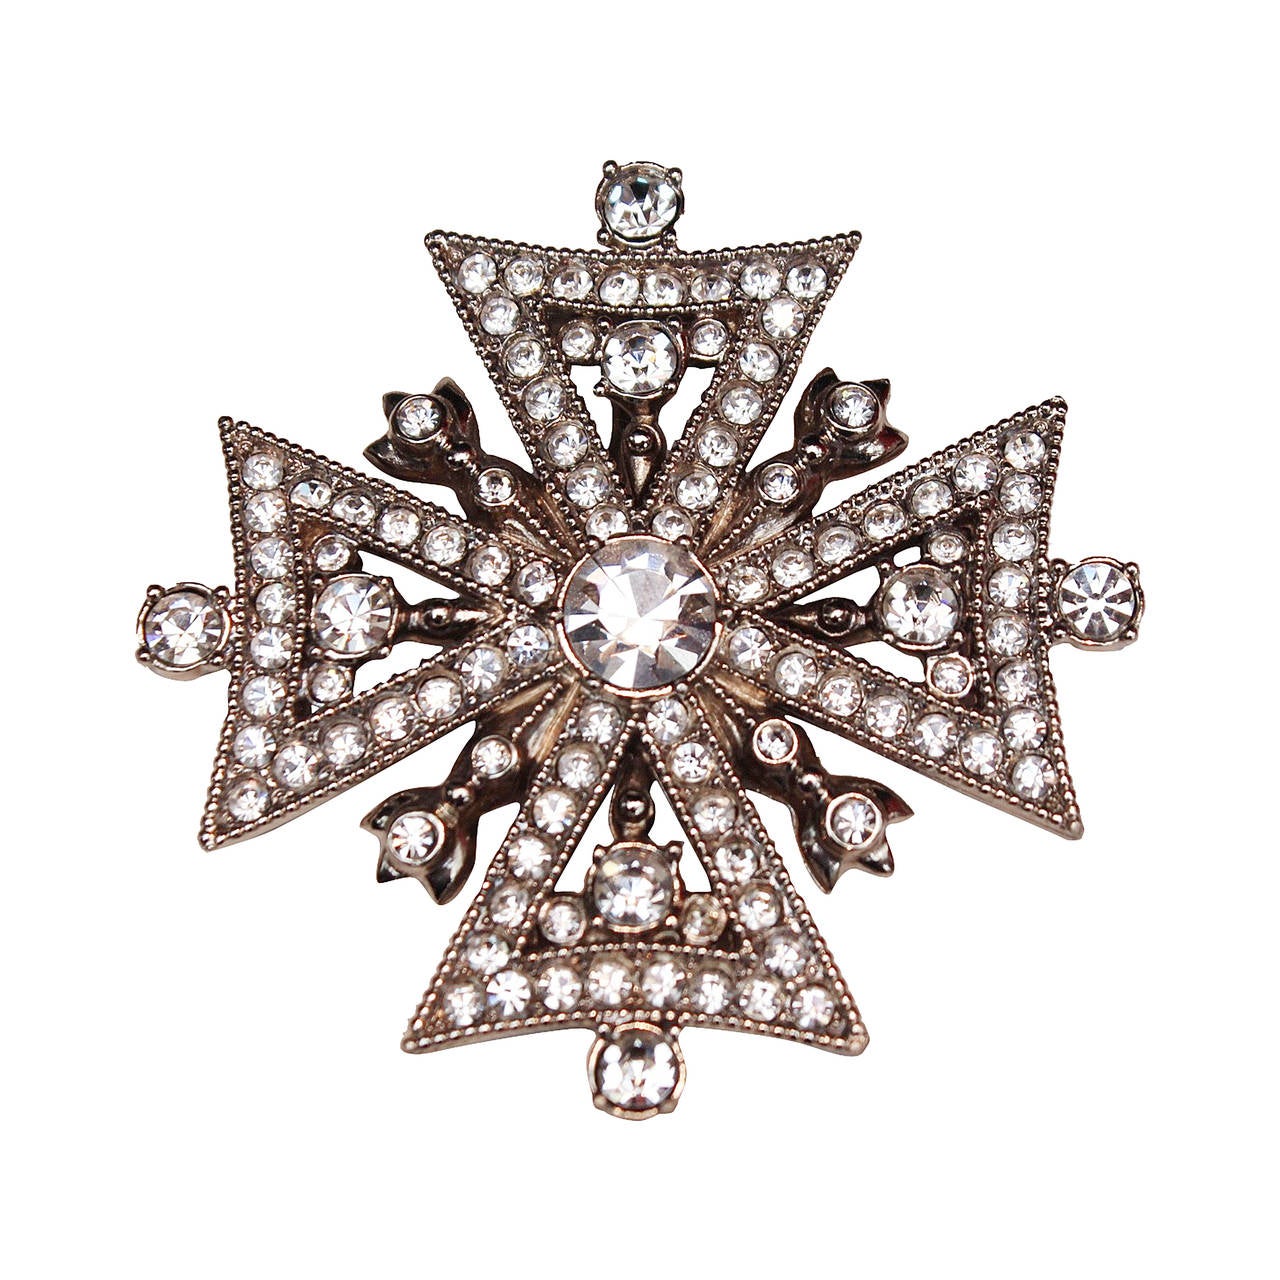 1990's Christian Dior Boutique Cross Brooch with Silver Metal and Crystals